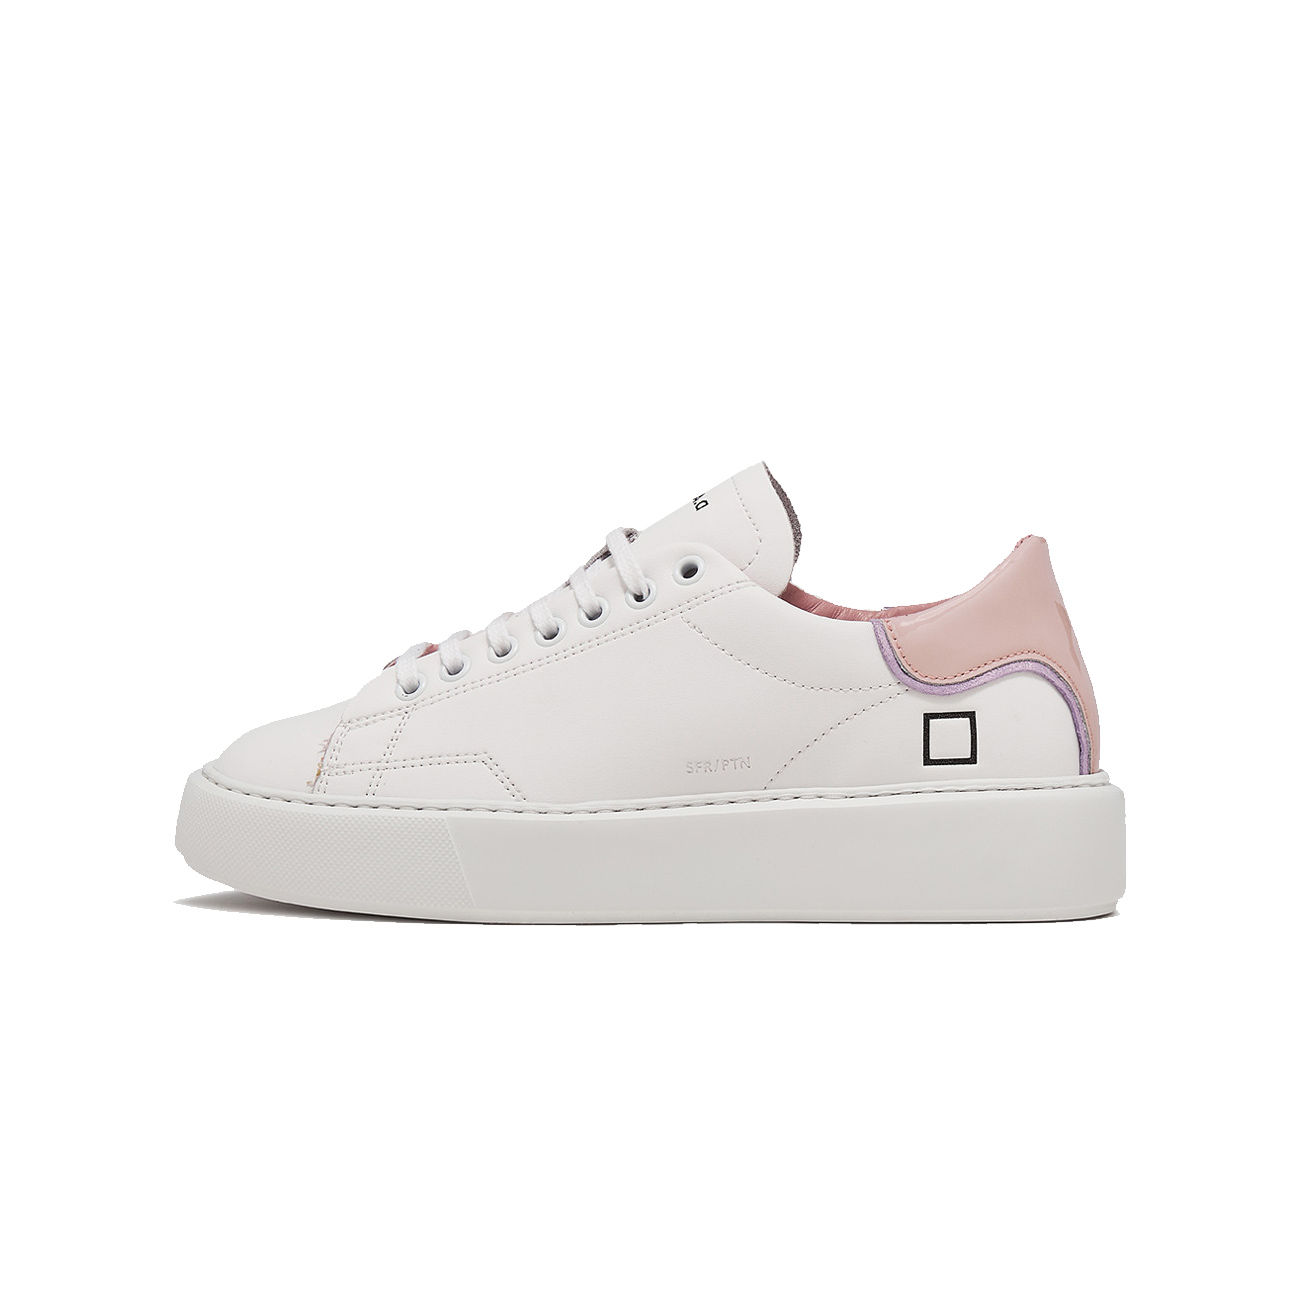 SNEAKERS SPHERE PATENT Woman White Pink 7000973100051